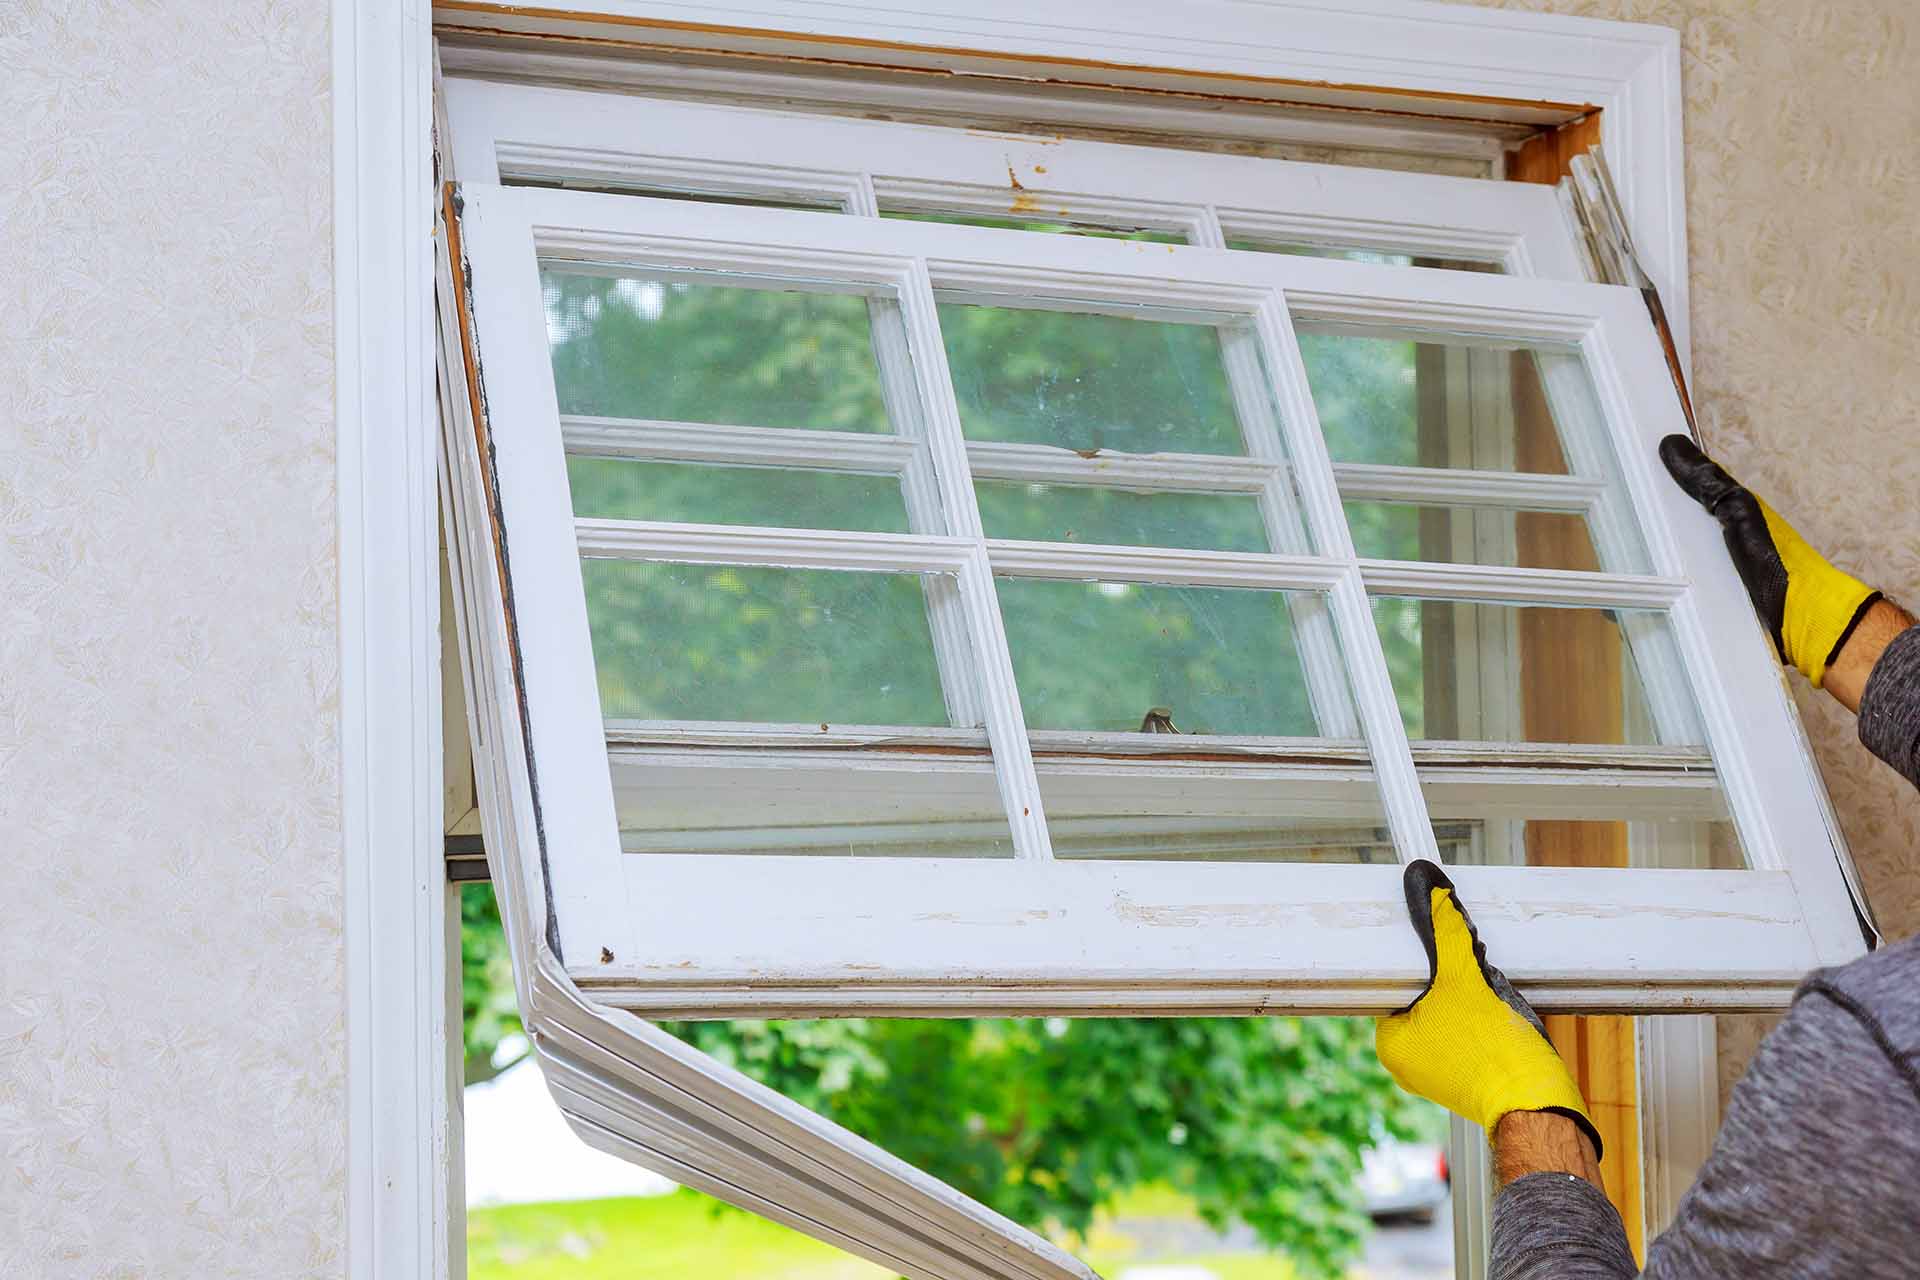 What Are the Benefits of Choosing Vinyl Windows for Home Window Replacement?